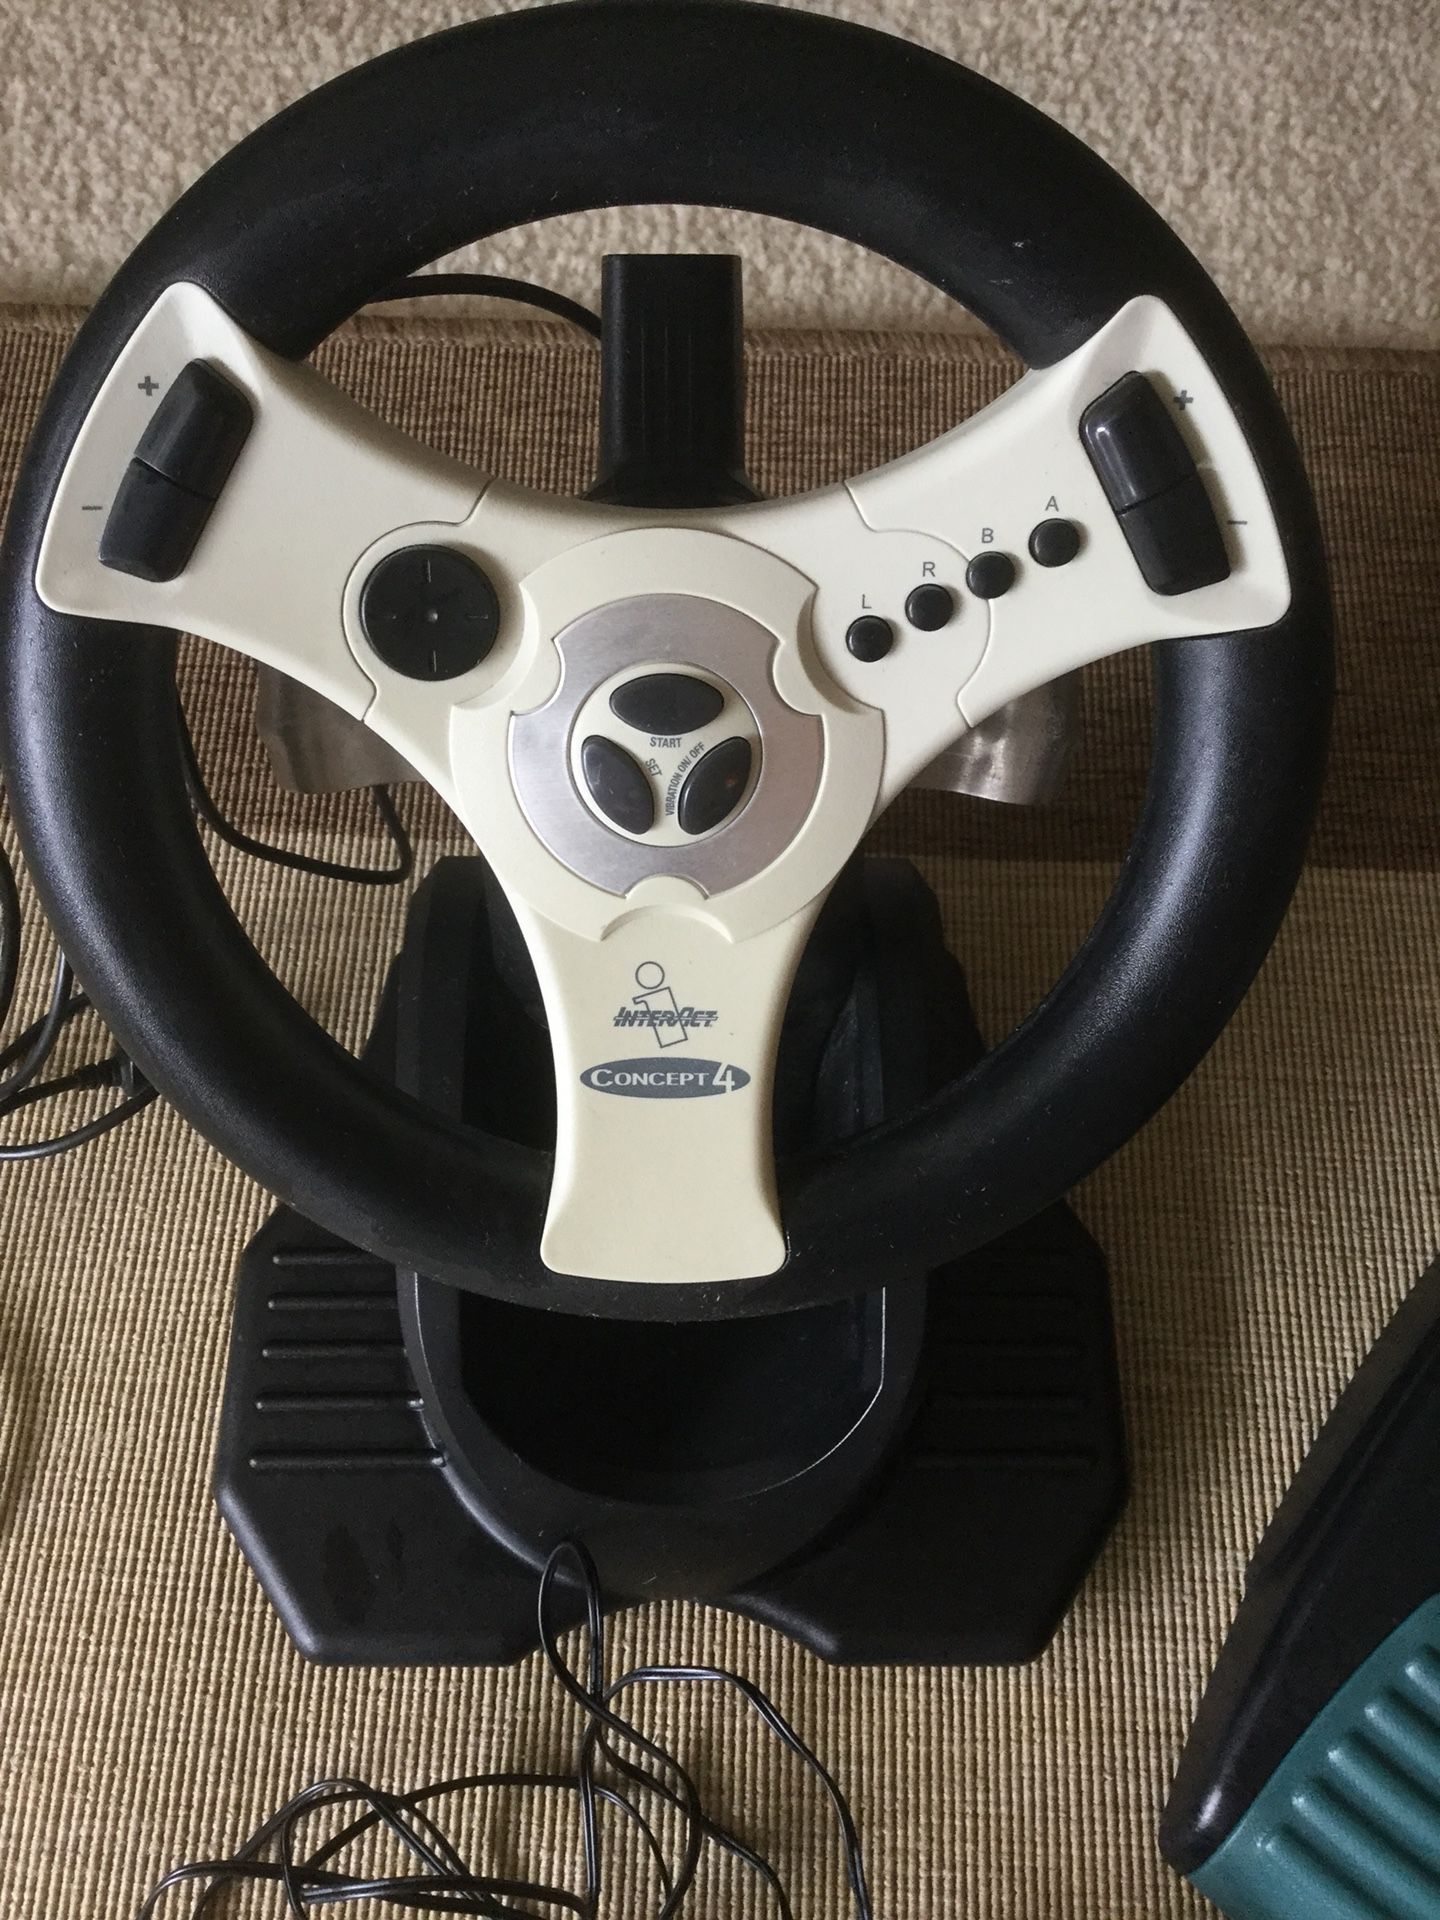 Gray and black Dreamcast steering wheel racing game controller / Visit for more items 😎👍